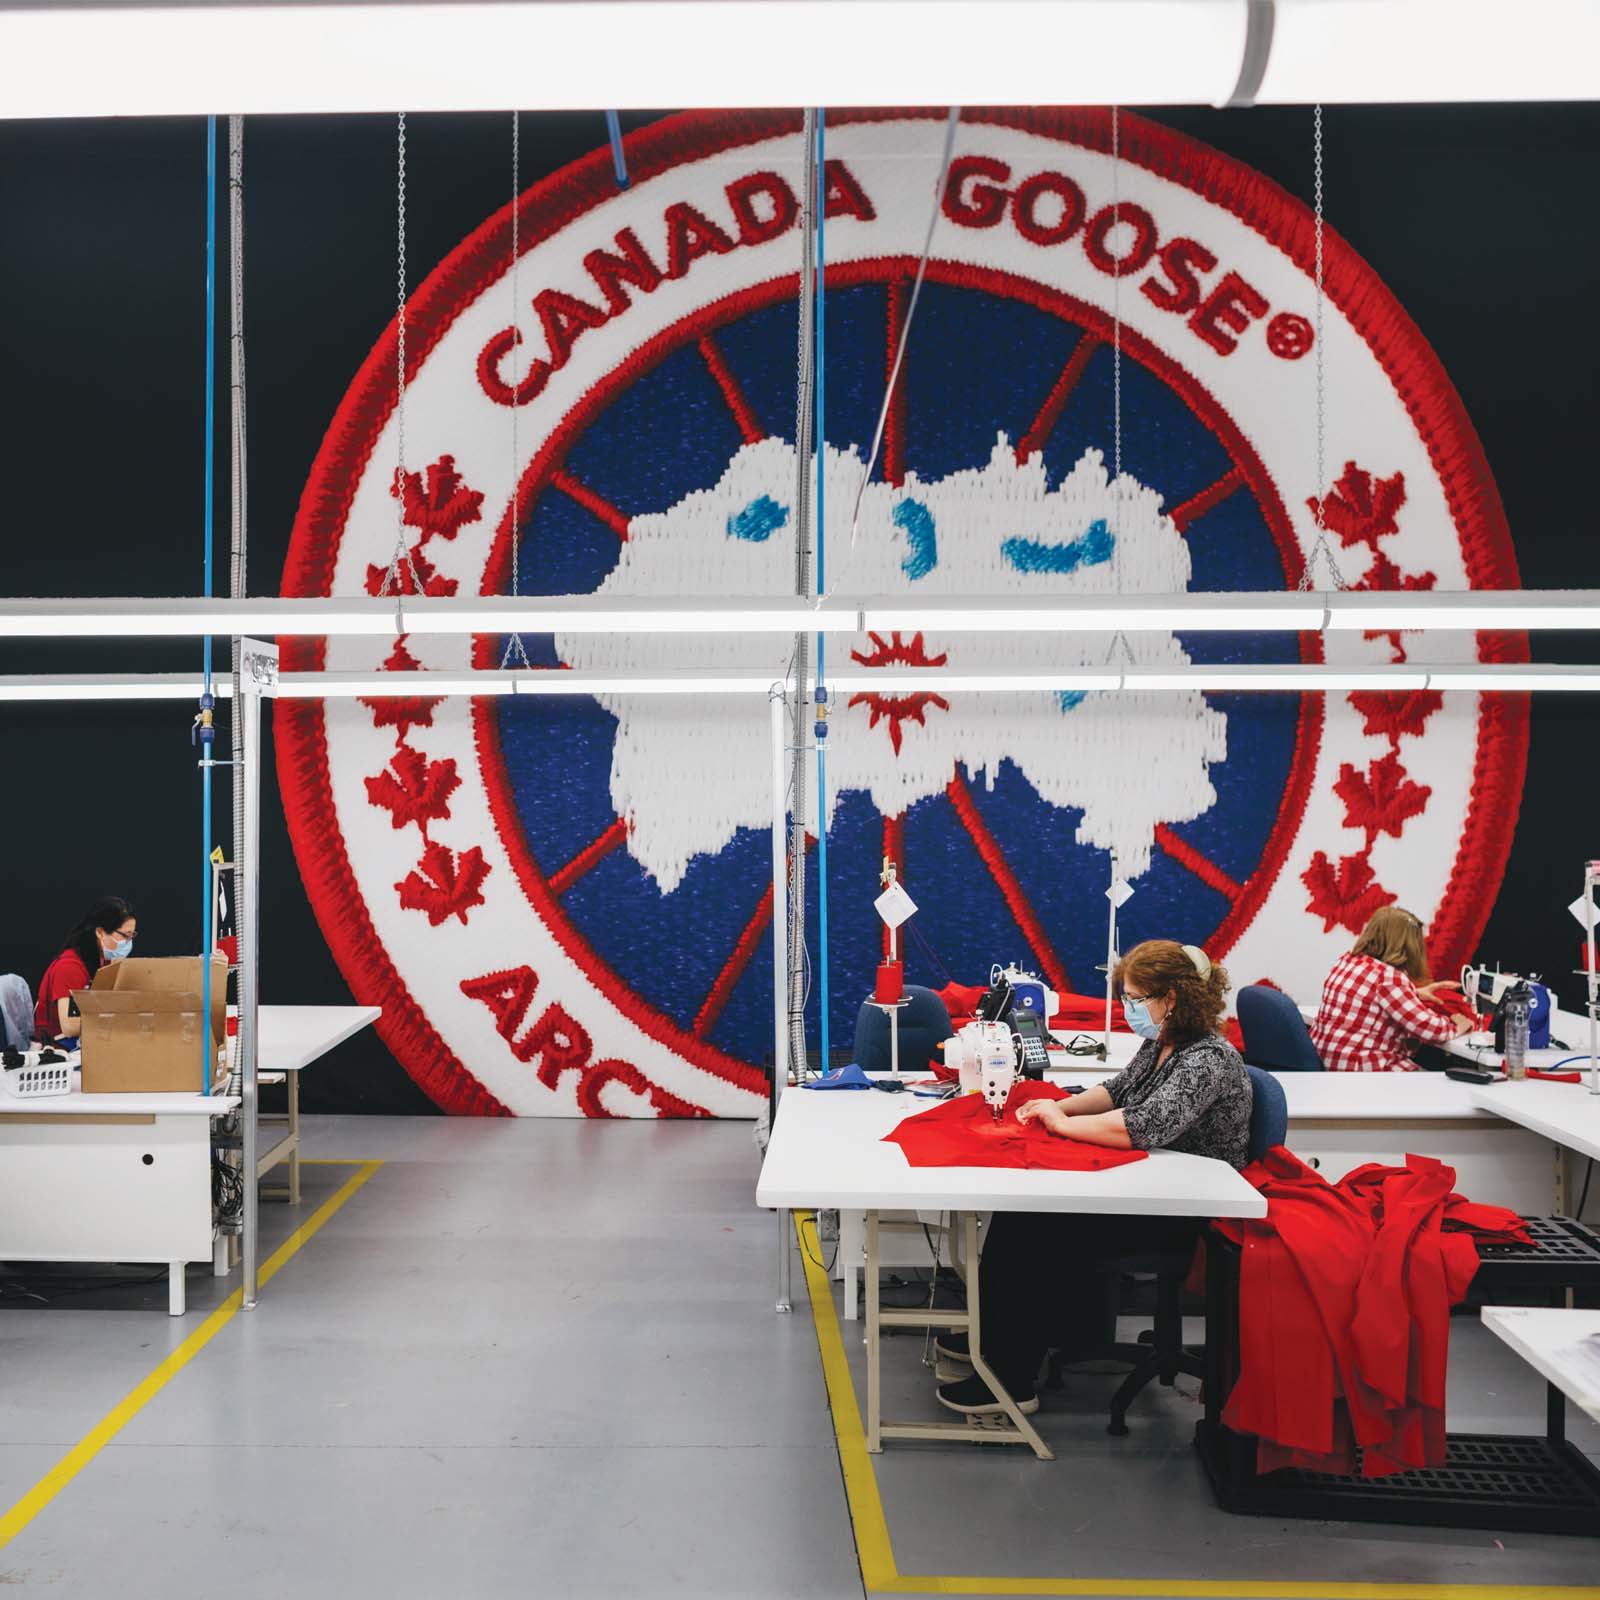 Story of a brand: Canada Goose